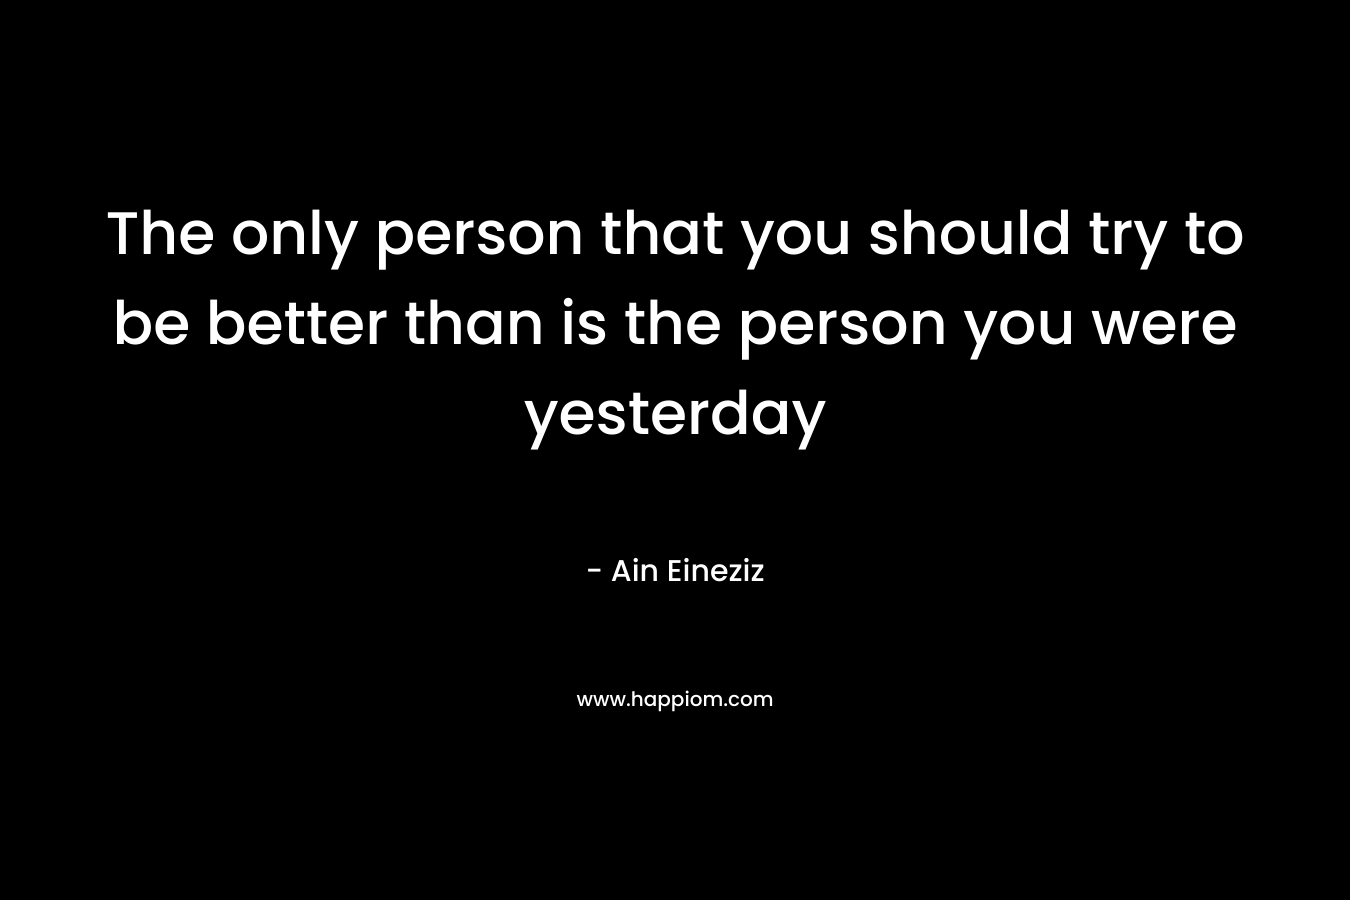 The only person that you should try to be better than is the person you were yesterday